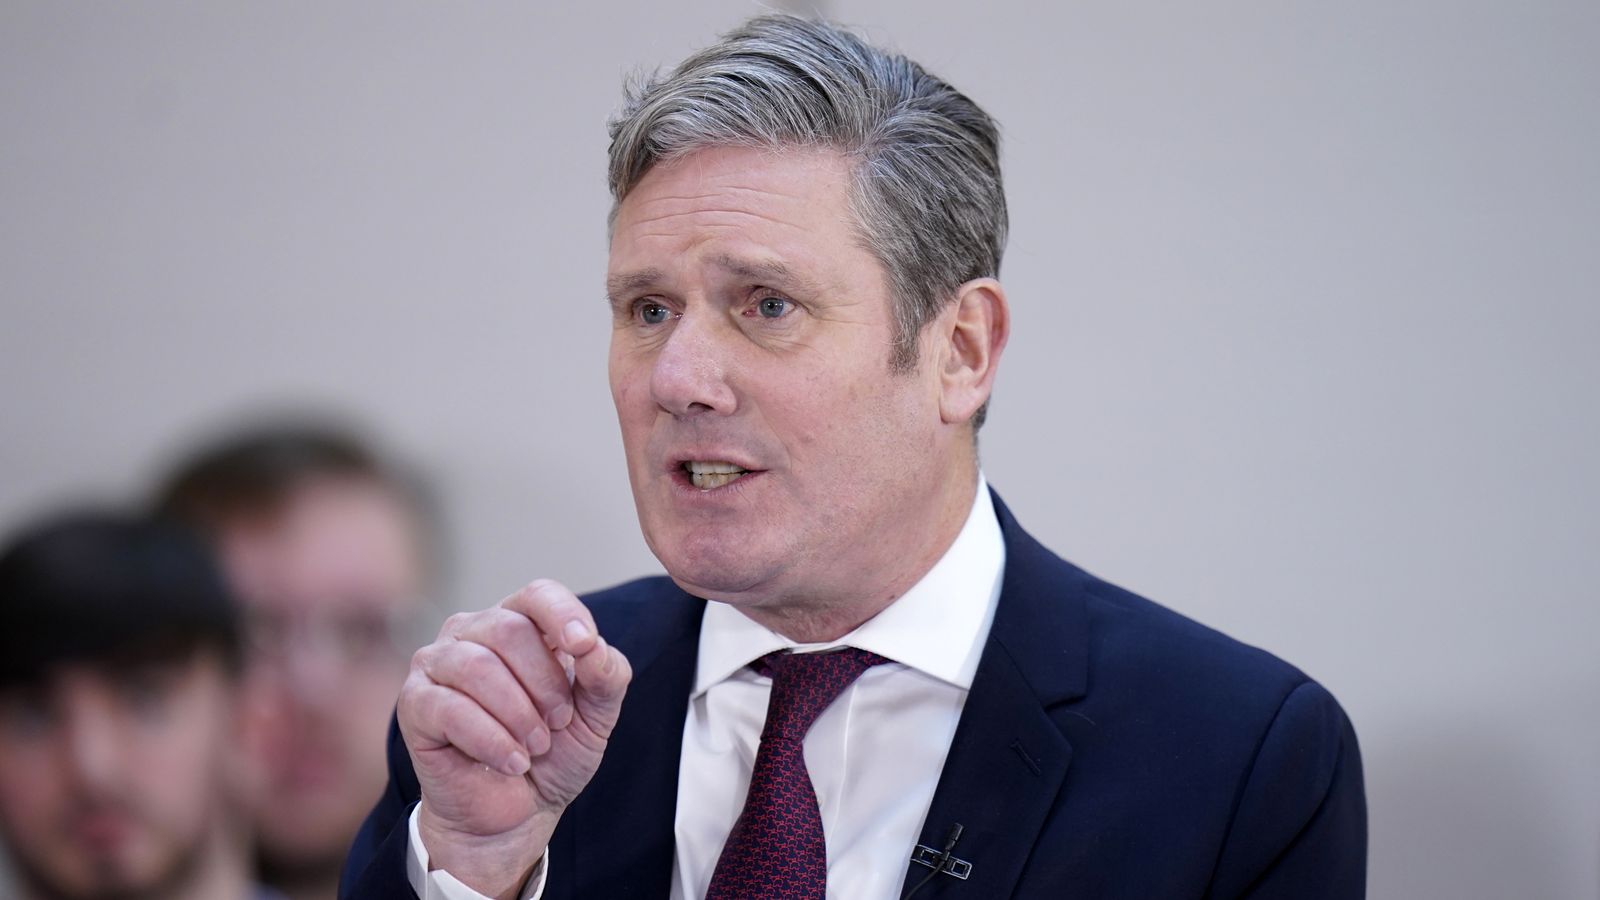 Sir Keir Starmer to pledge end of 'sticking plaster politics' in first big speech of 2023